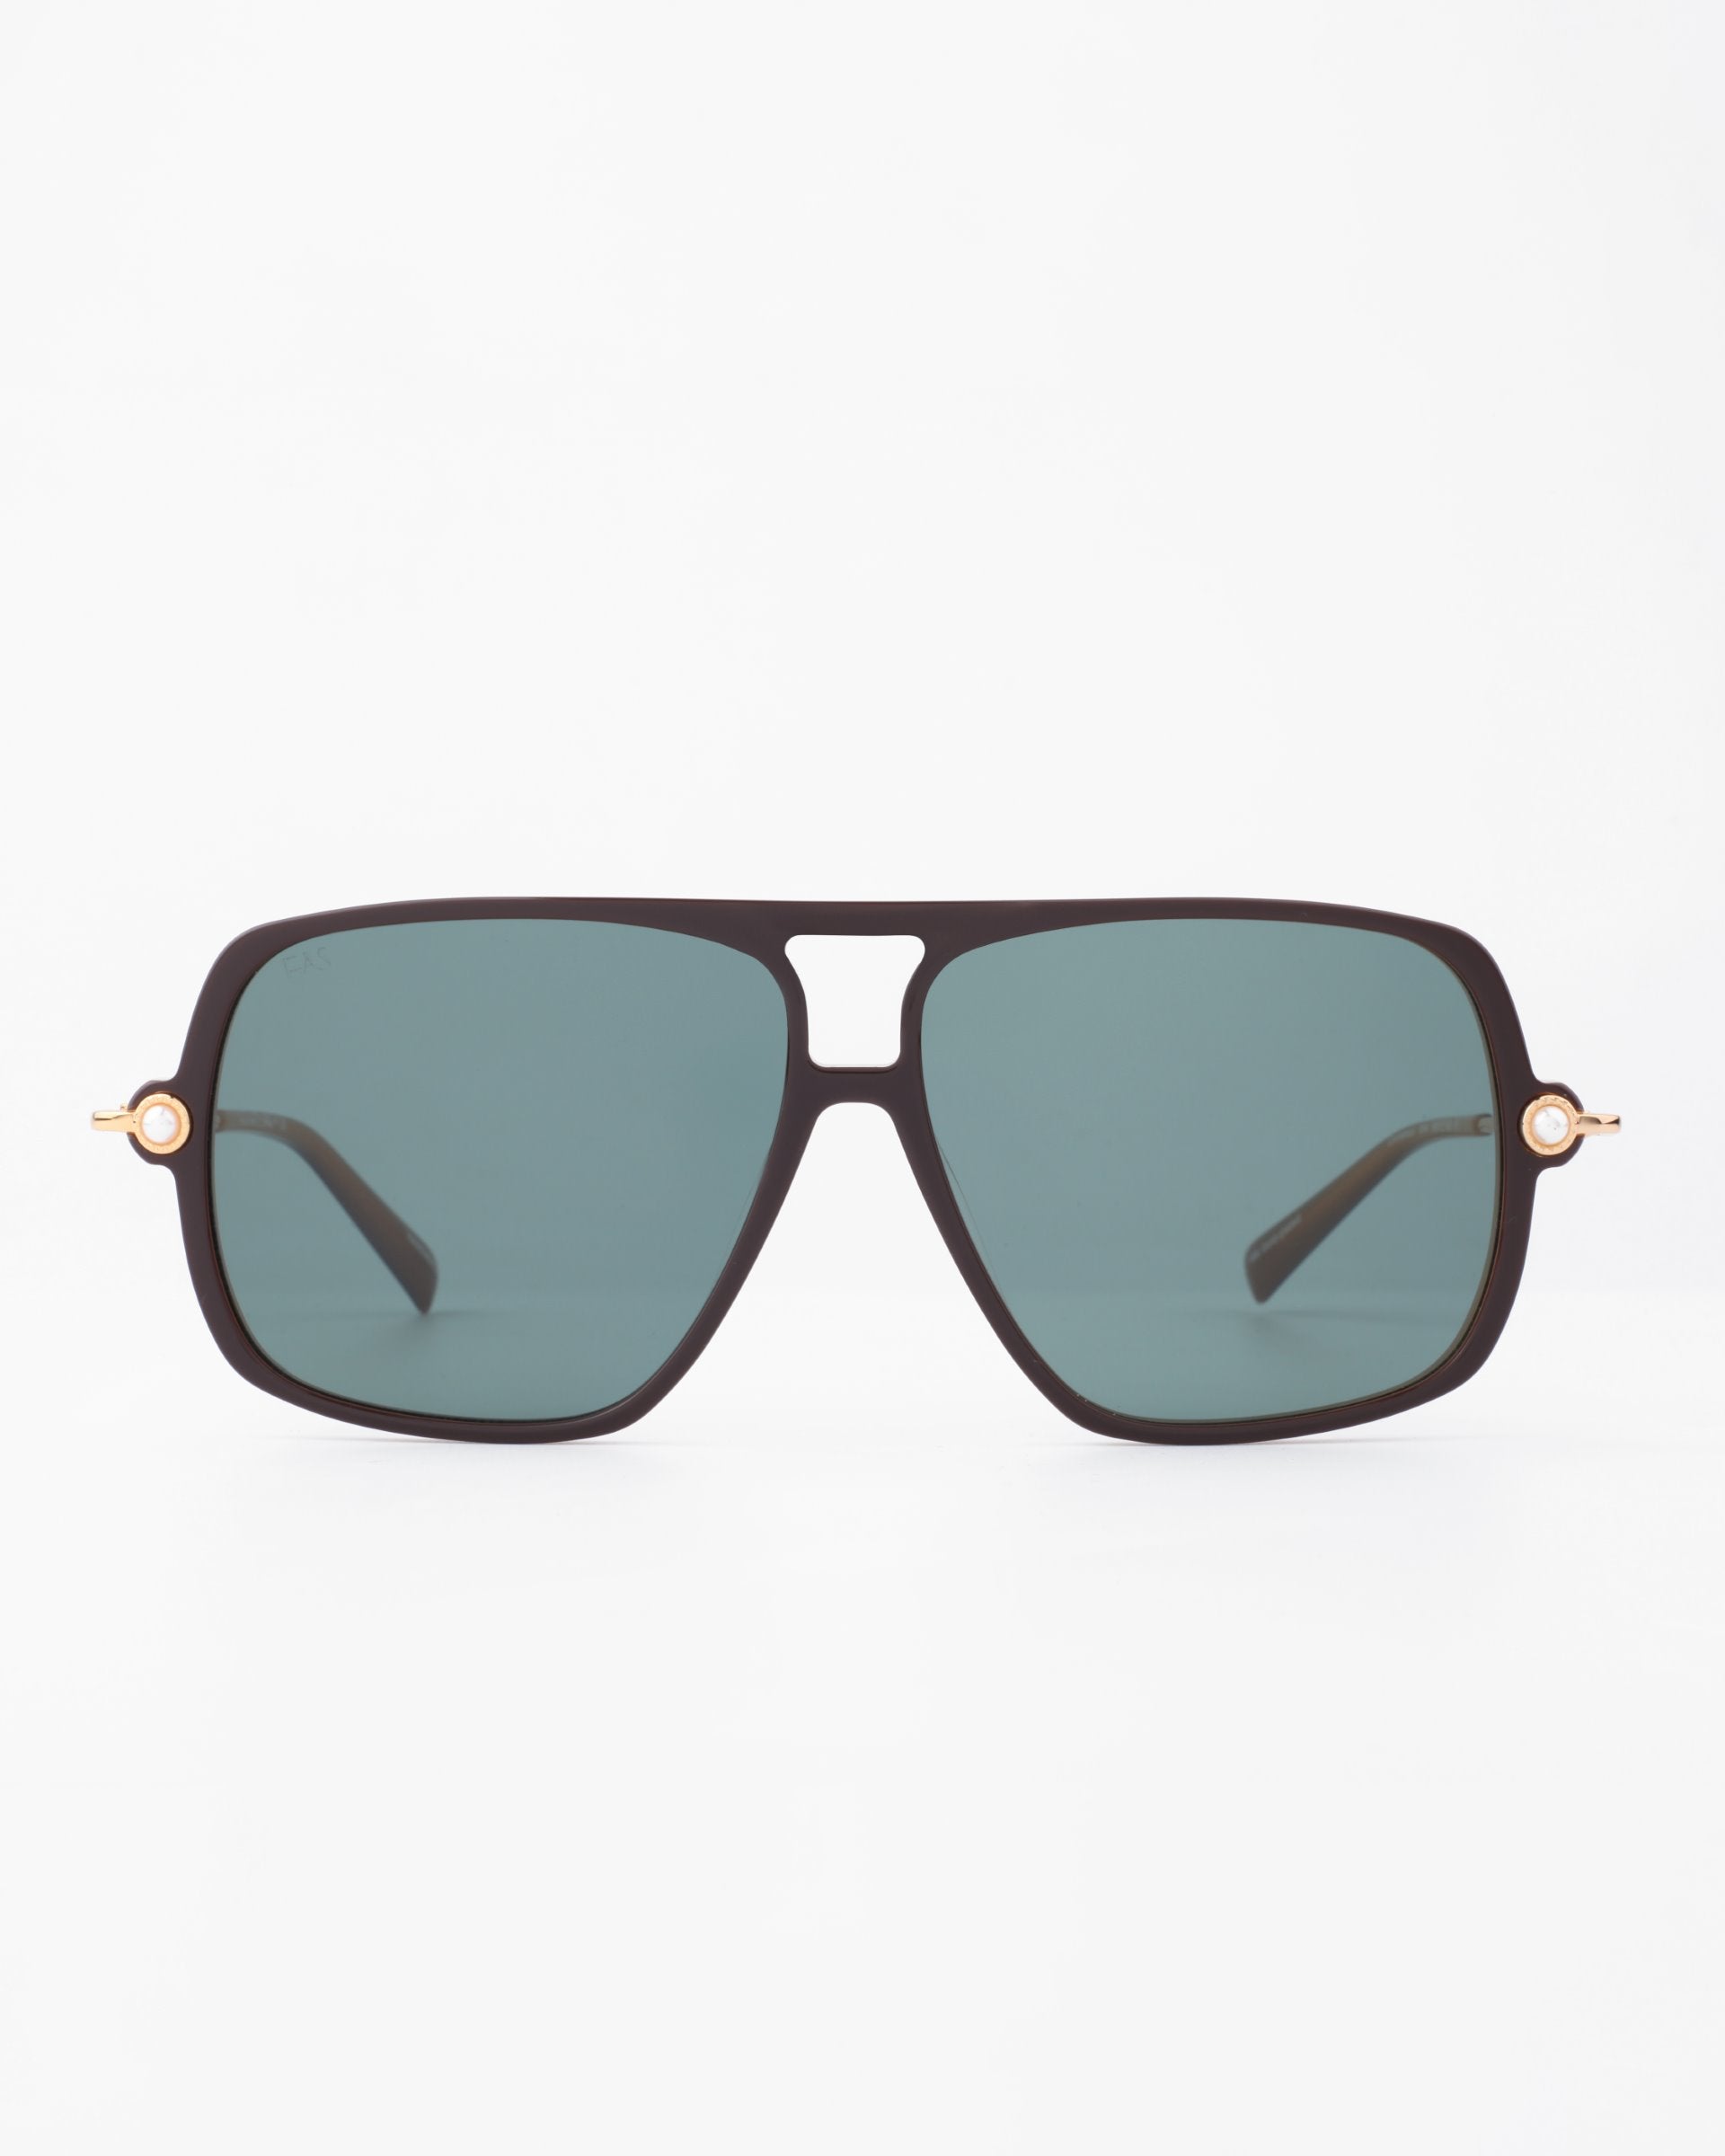 A pair of stylish, large square sunglasses with dark green lenses and a slim black frame. The bridge has a unique double-bar design, and the temples feature small 18-karat gold-plated accents near the hinges. The background is plain white. Introducing Cinnamon by For Art&#39;s Sake®.